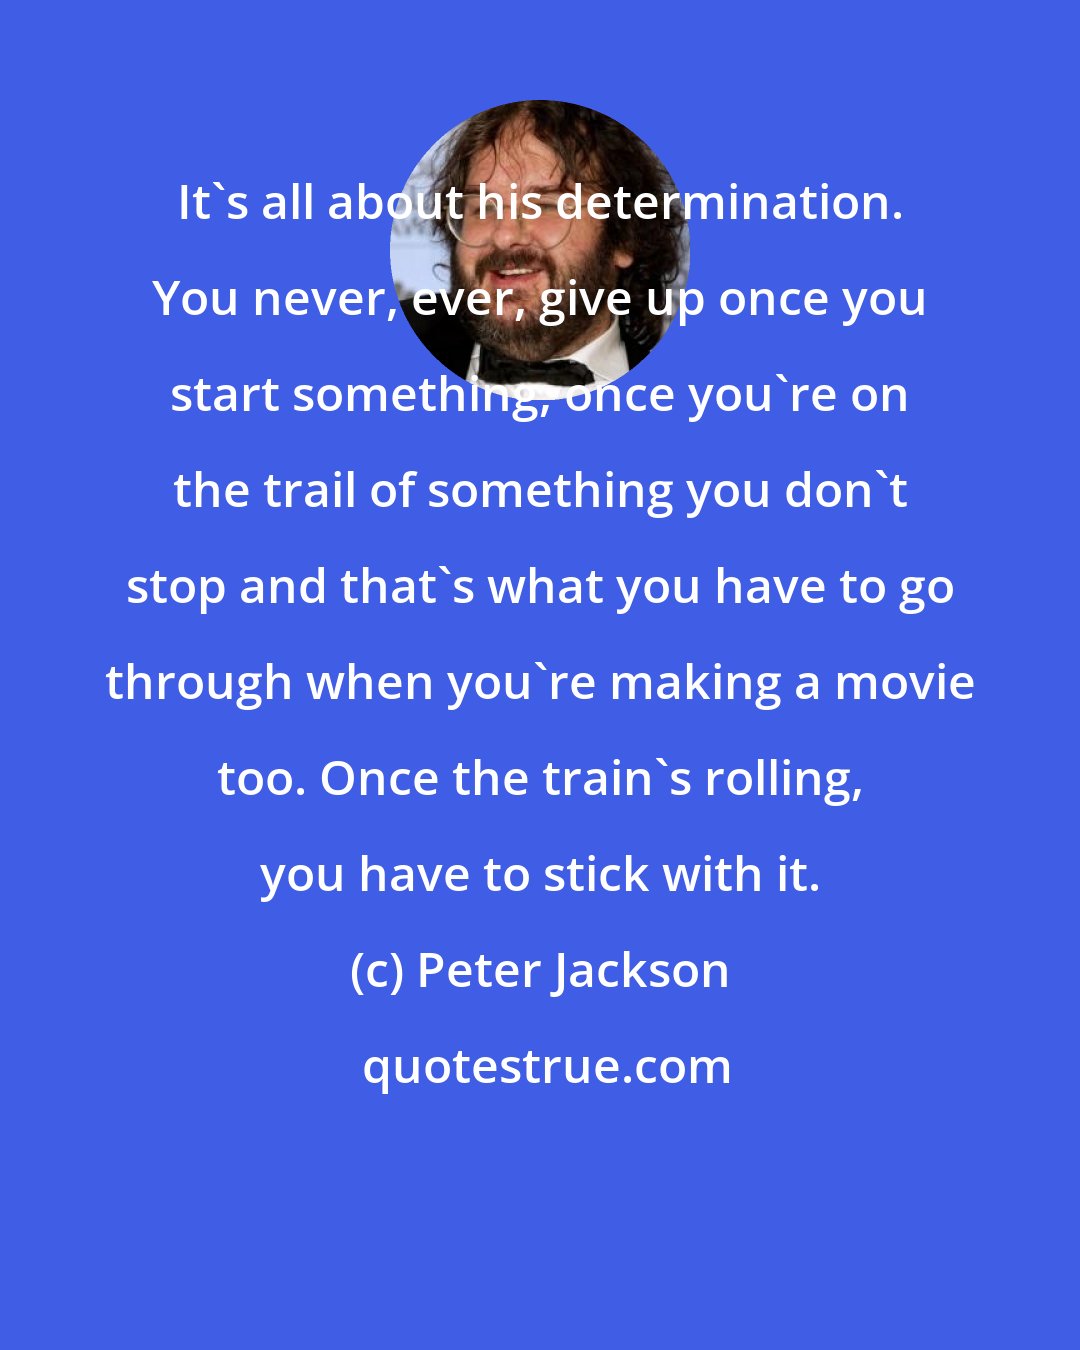 Peter Jackson: It's all about his determination. You never, ever, give up once you start something, once you're on the trail of something you don't stop and that's what you have to go through when you're making a movie too. Once the train's rolling, you have to stick with it.